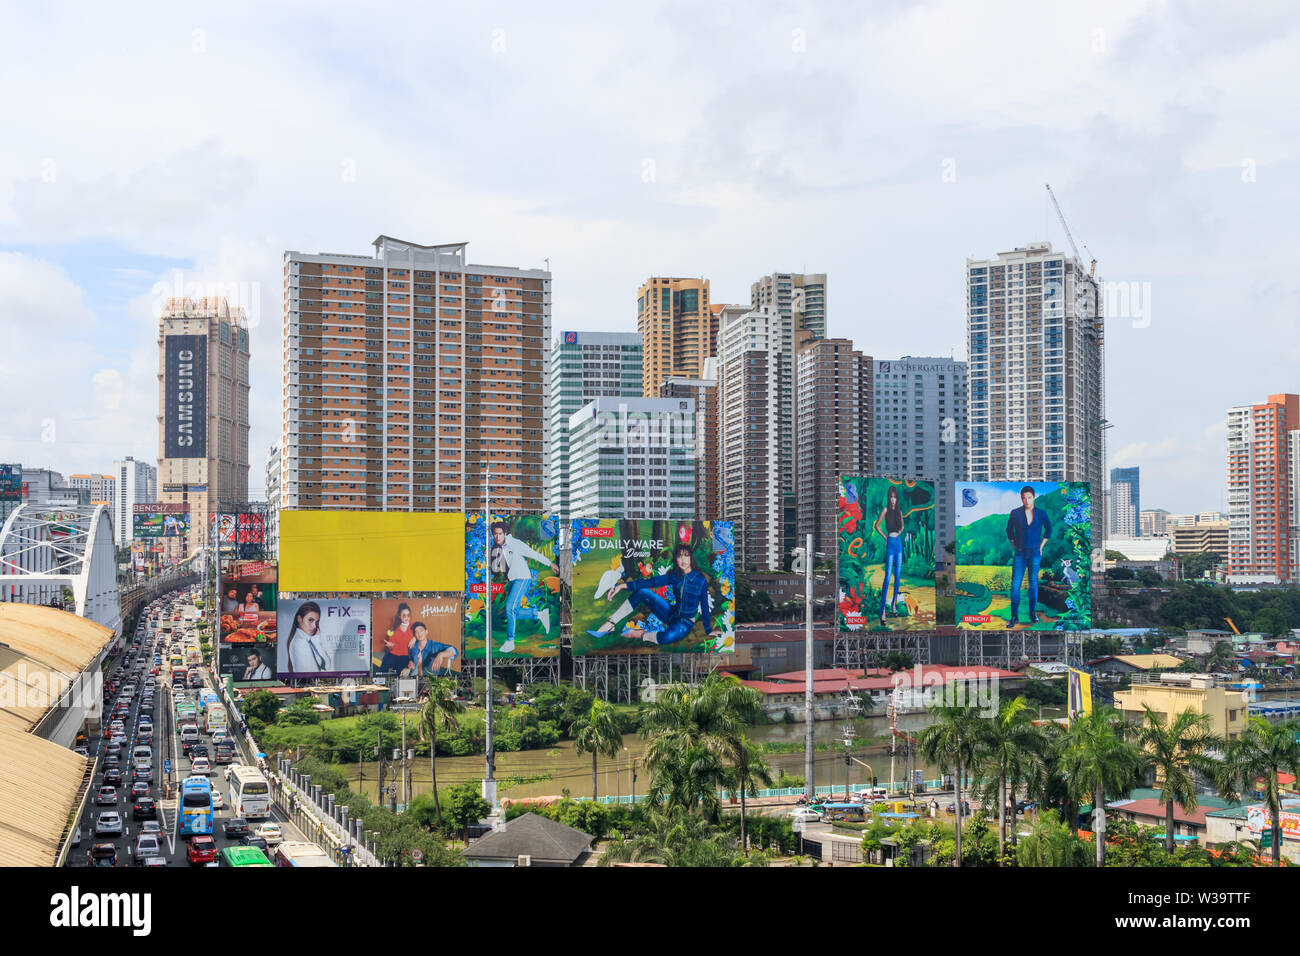 Mandaluyong, Manila, Philippines - July 29, 2018: View of Buildings in Manila Stock Photo